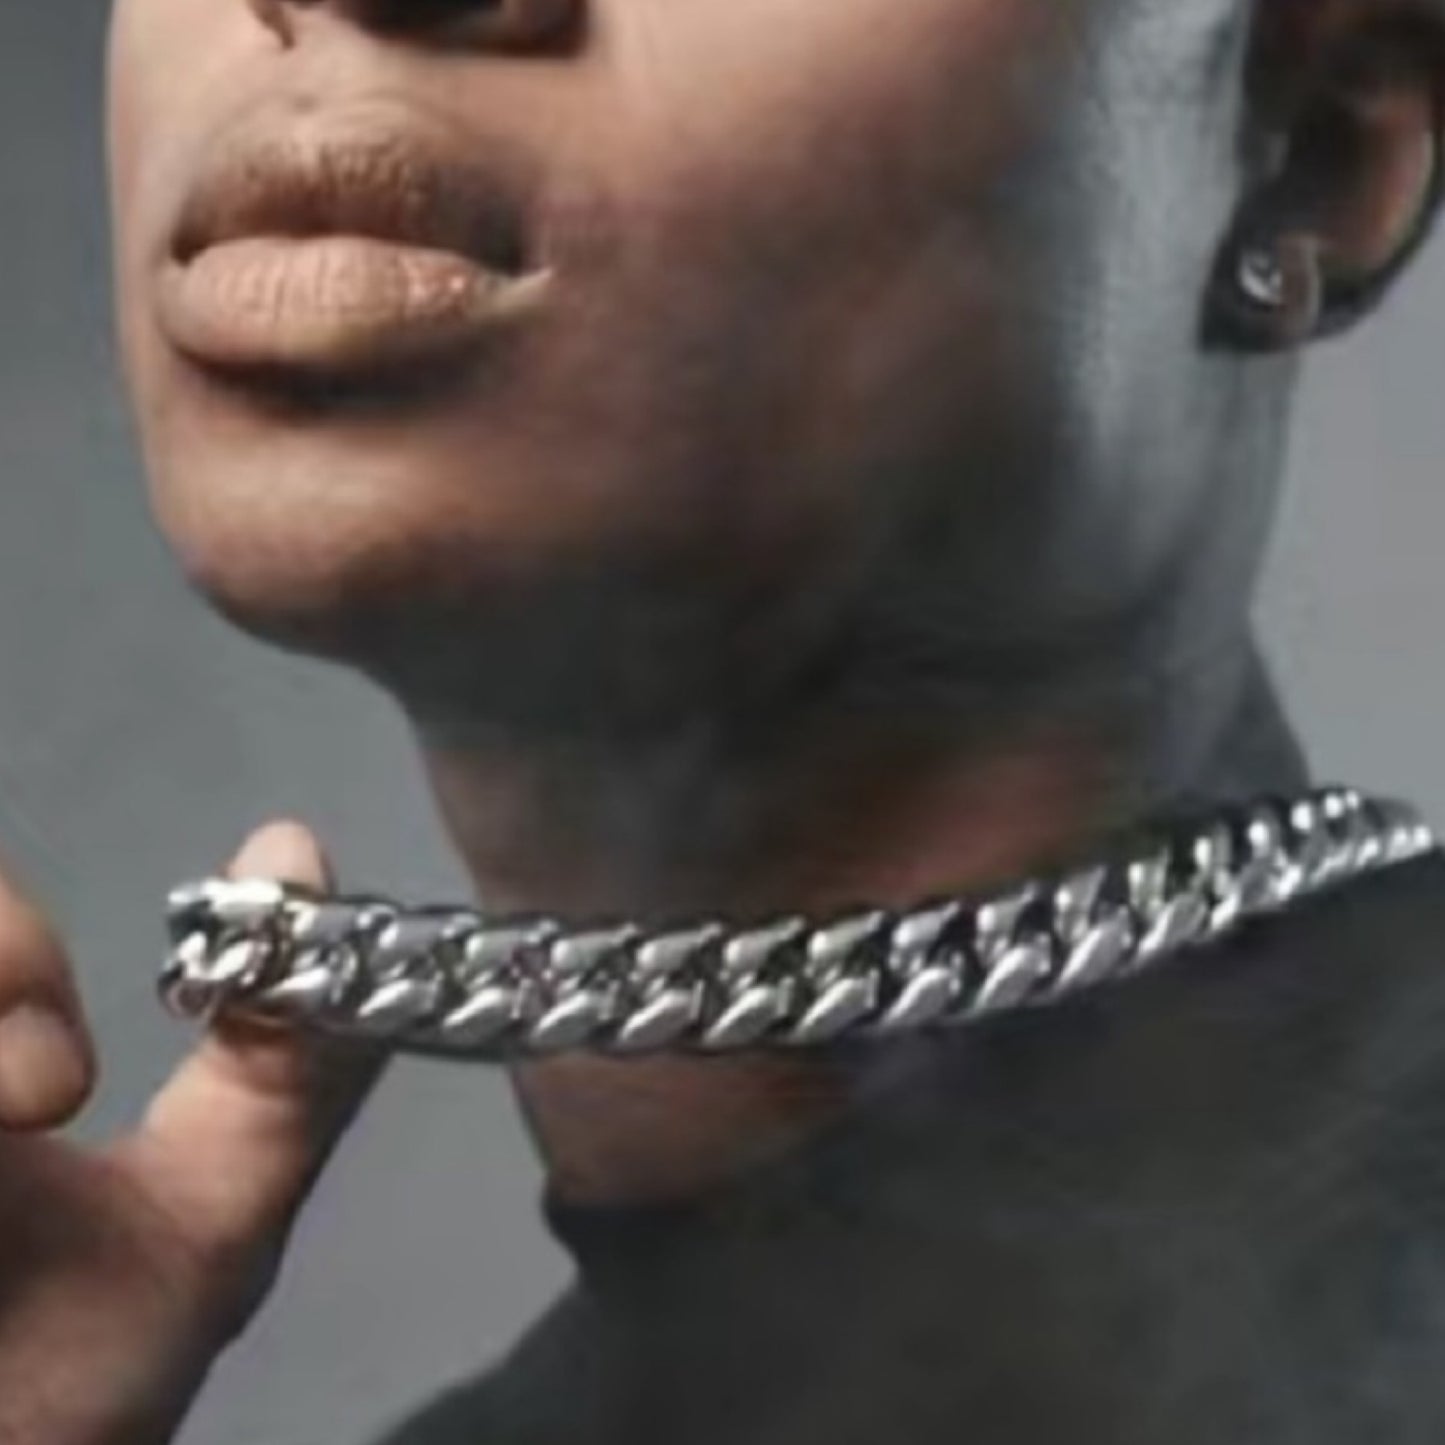 Thick Stainless Steel Curb Chain Hip Hop Style Necklace